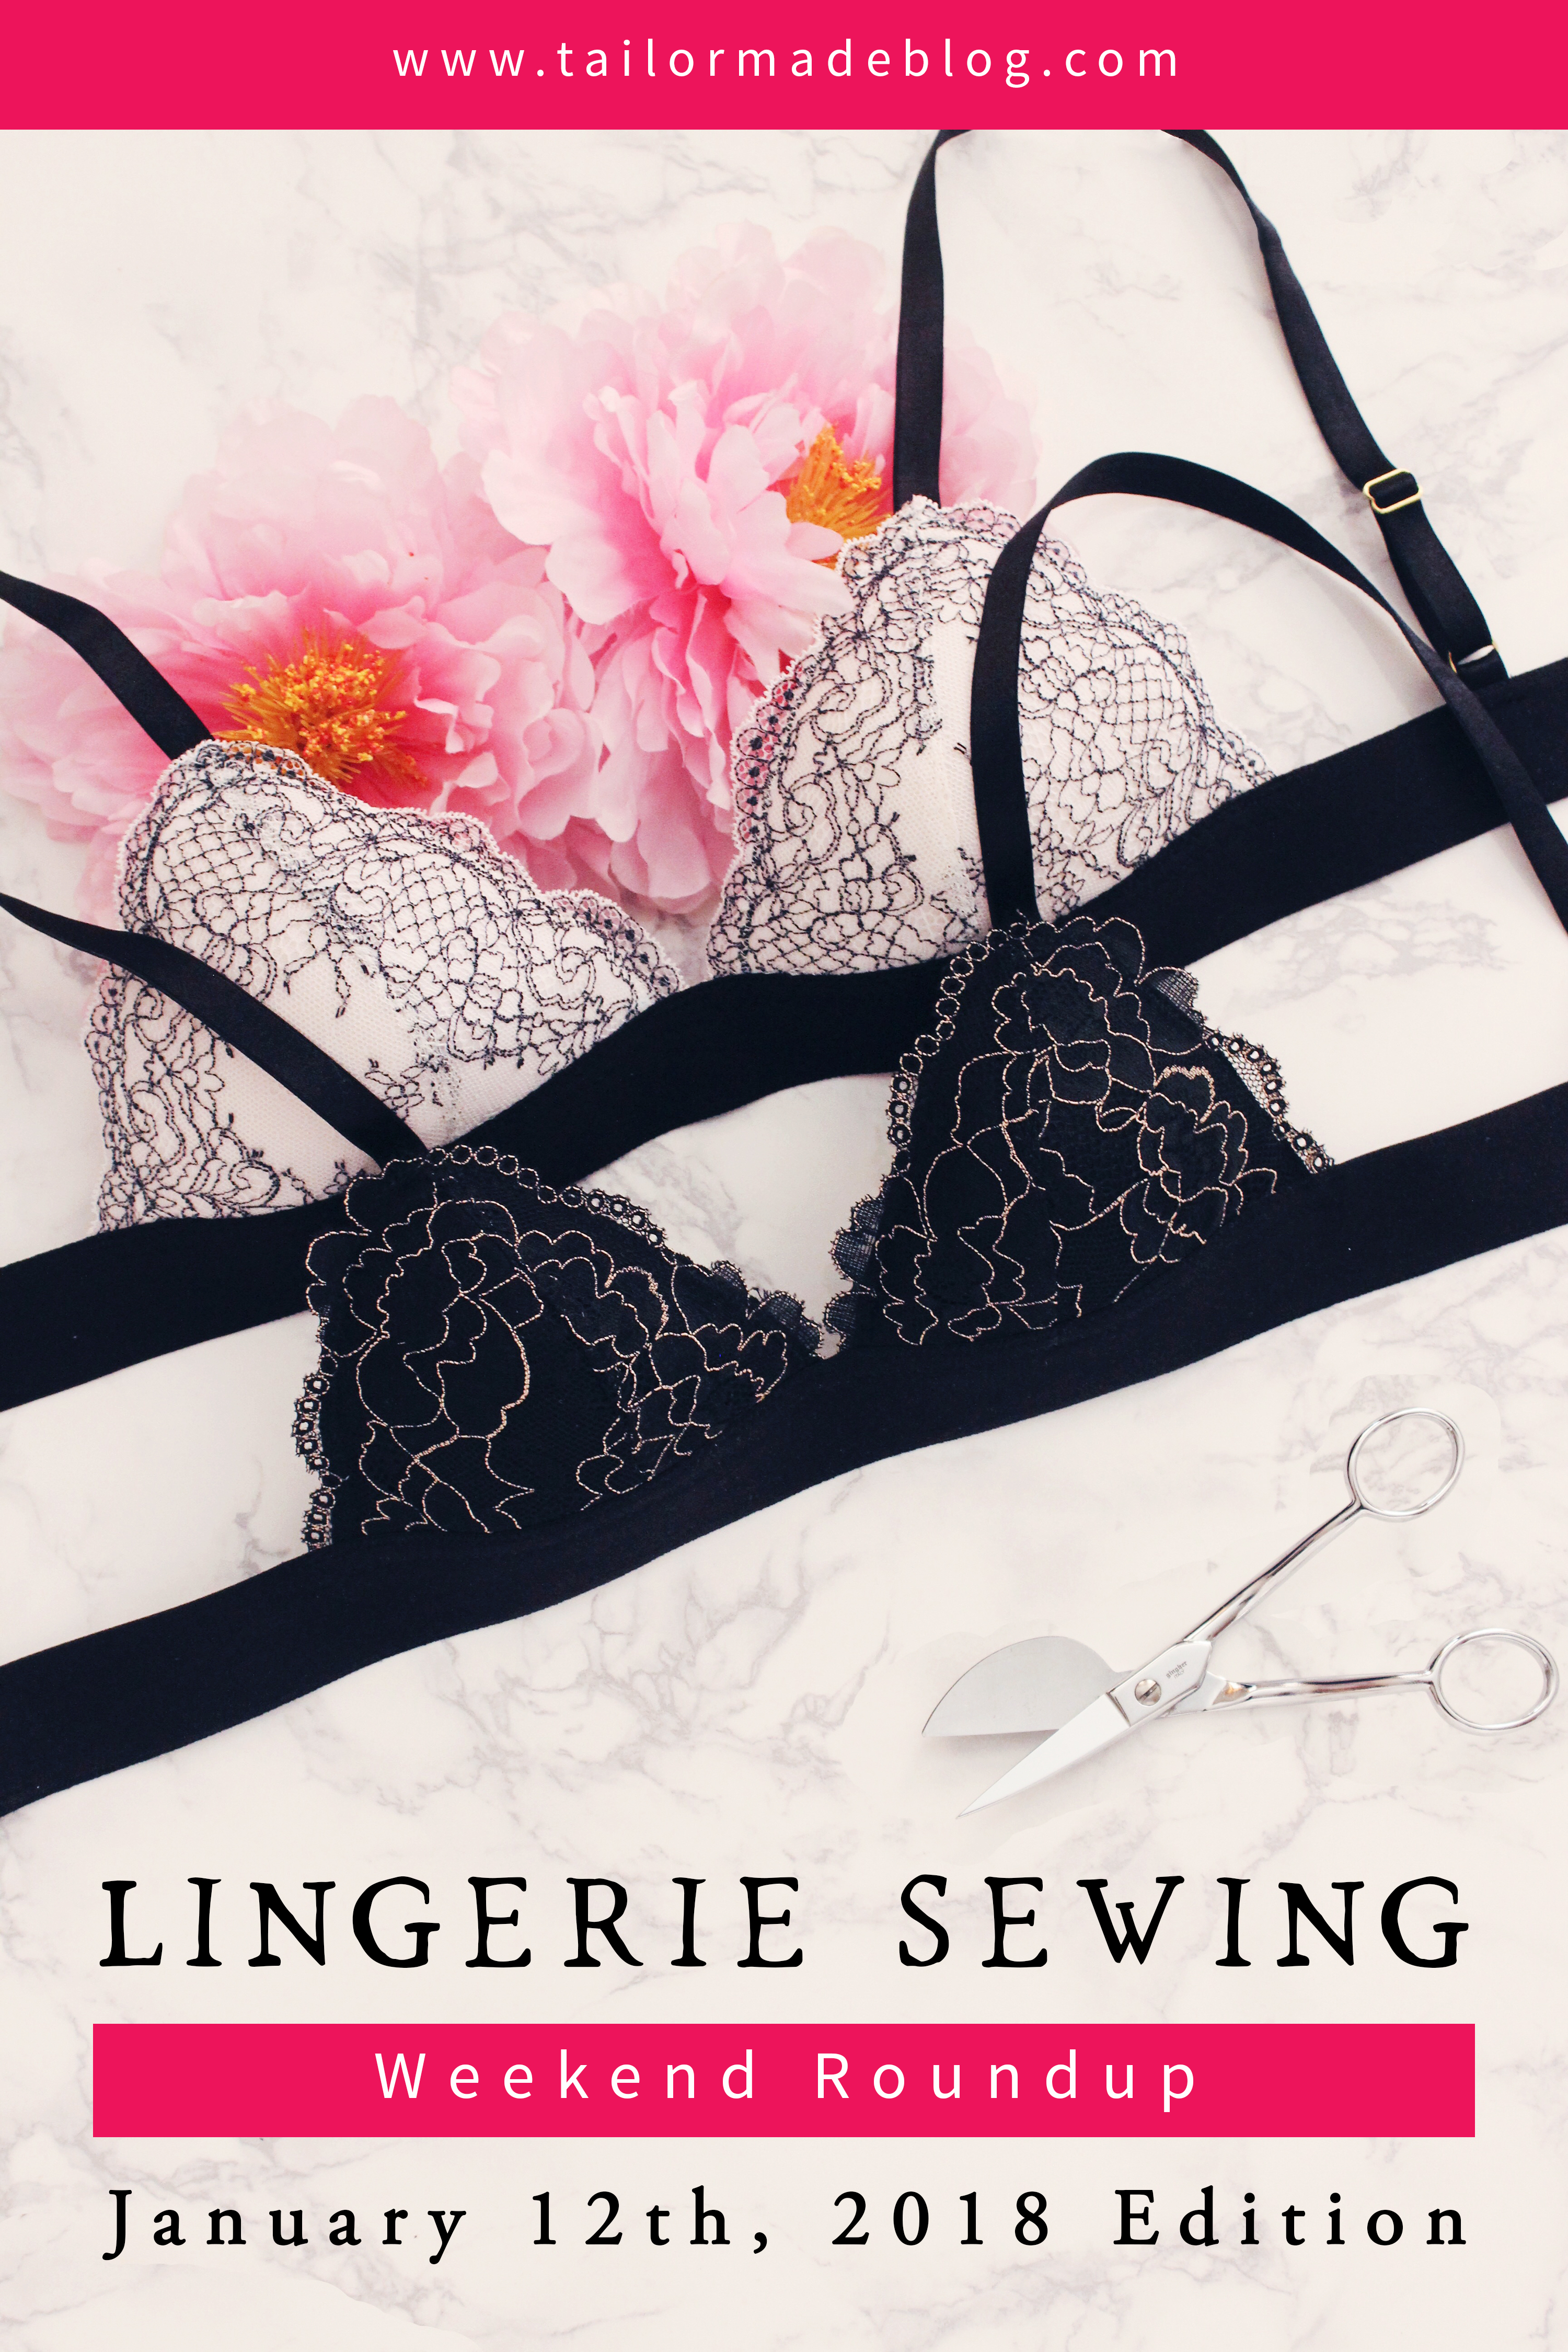 January 12th, 2018 Lingerie Sewing Weekend Round Up Latest news and makes and sewing projects from the lingerie sewing bra making community